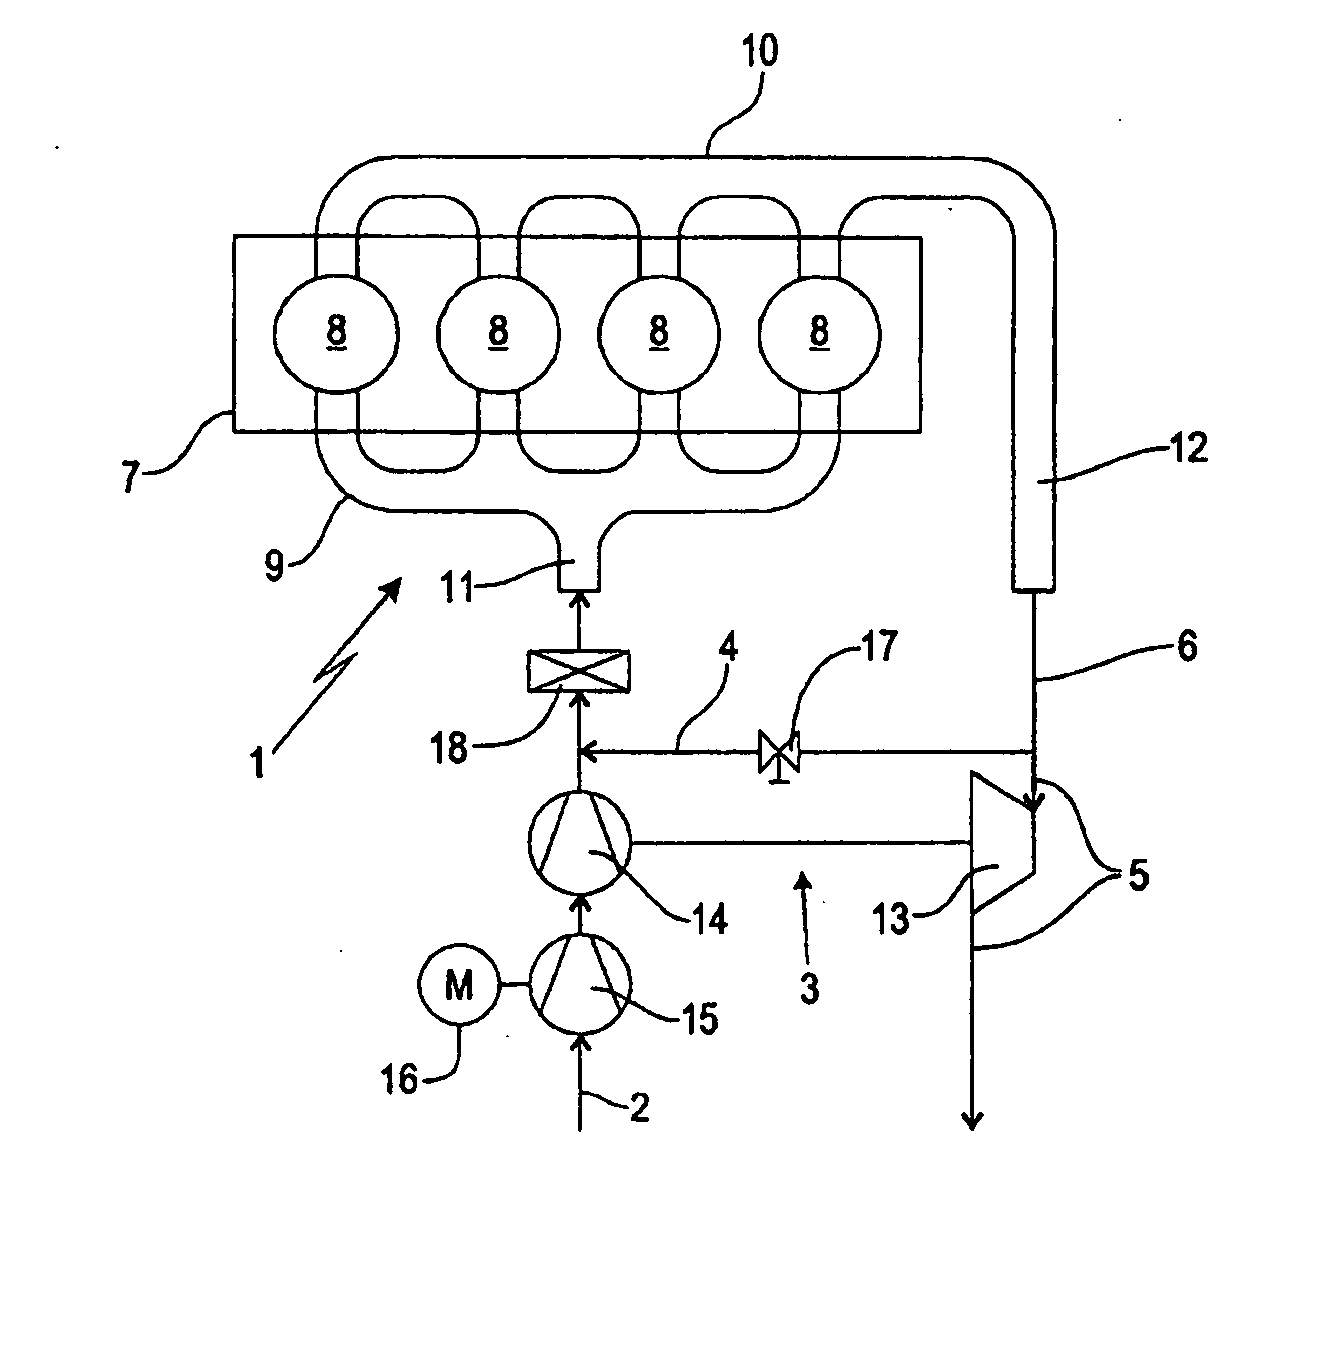 Method for operating a spark ignition engine